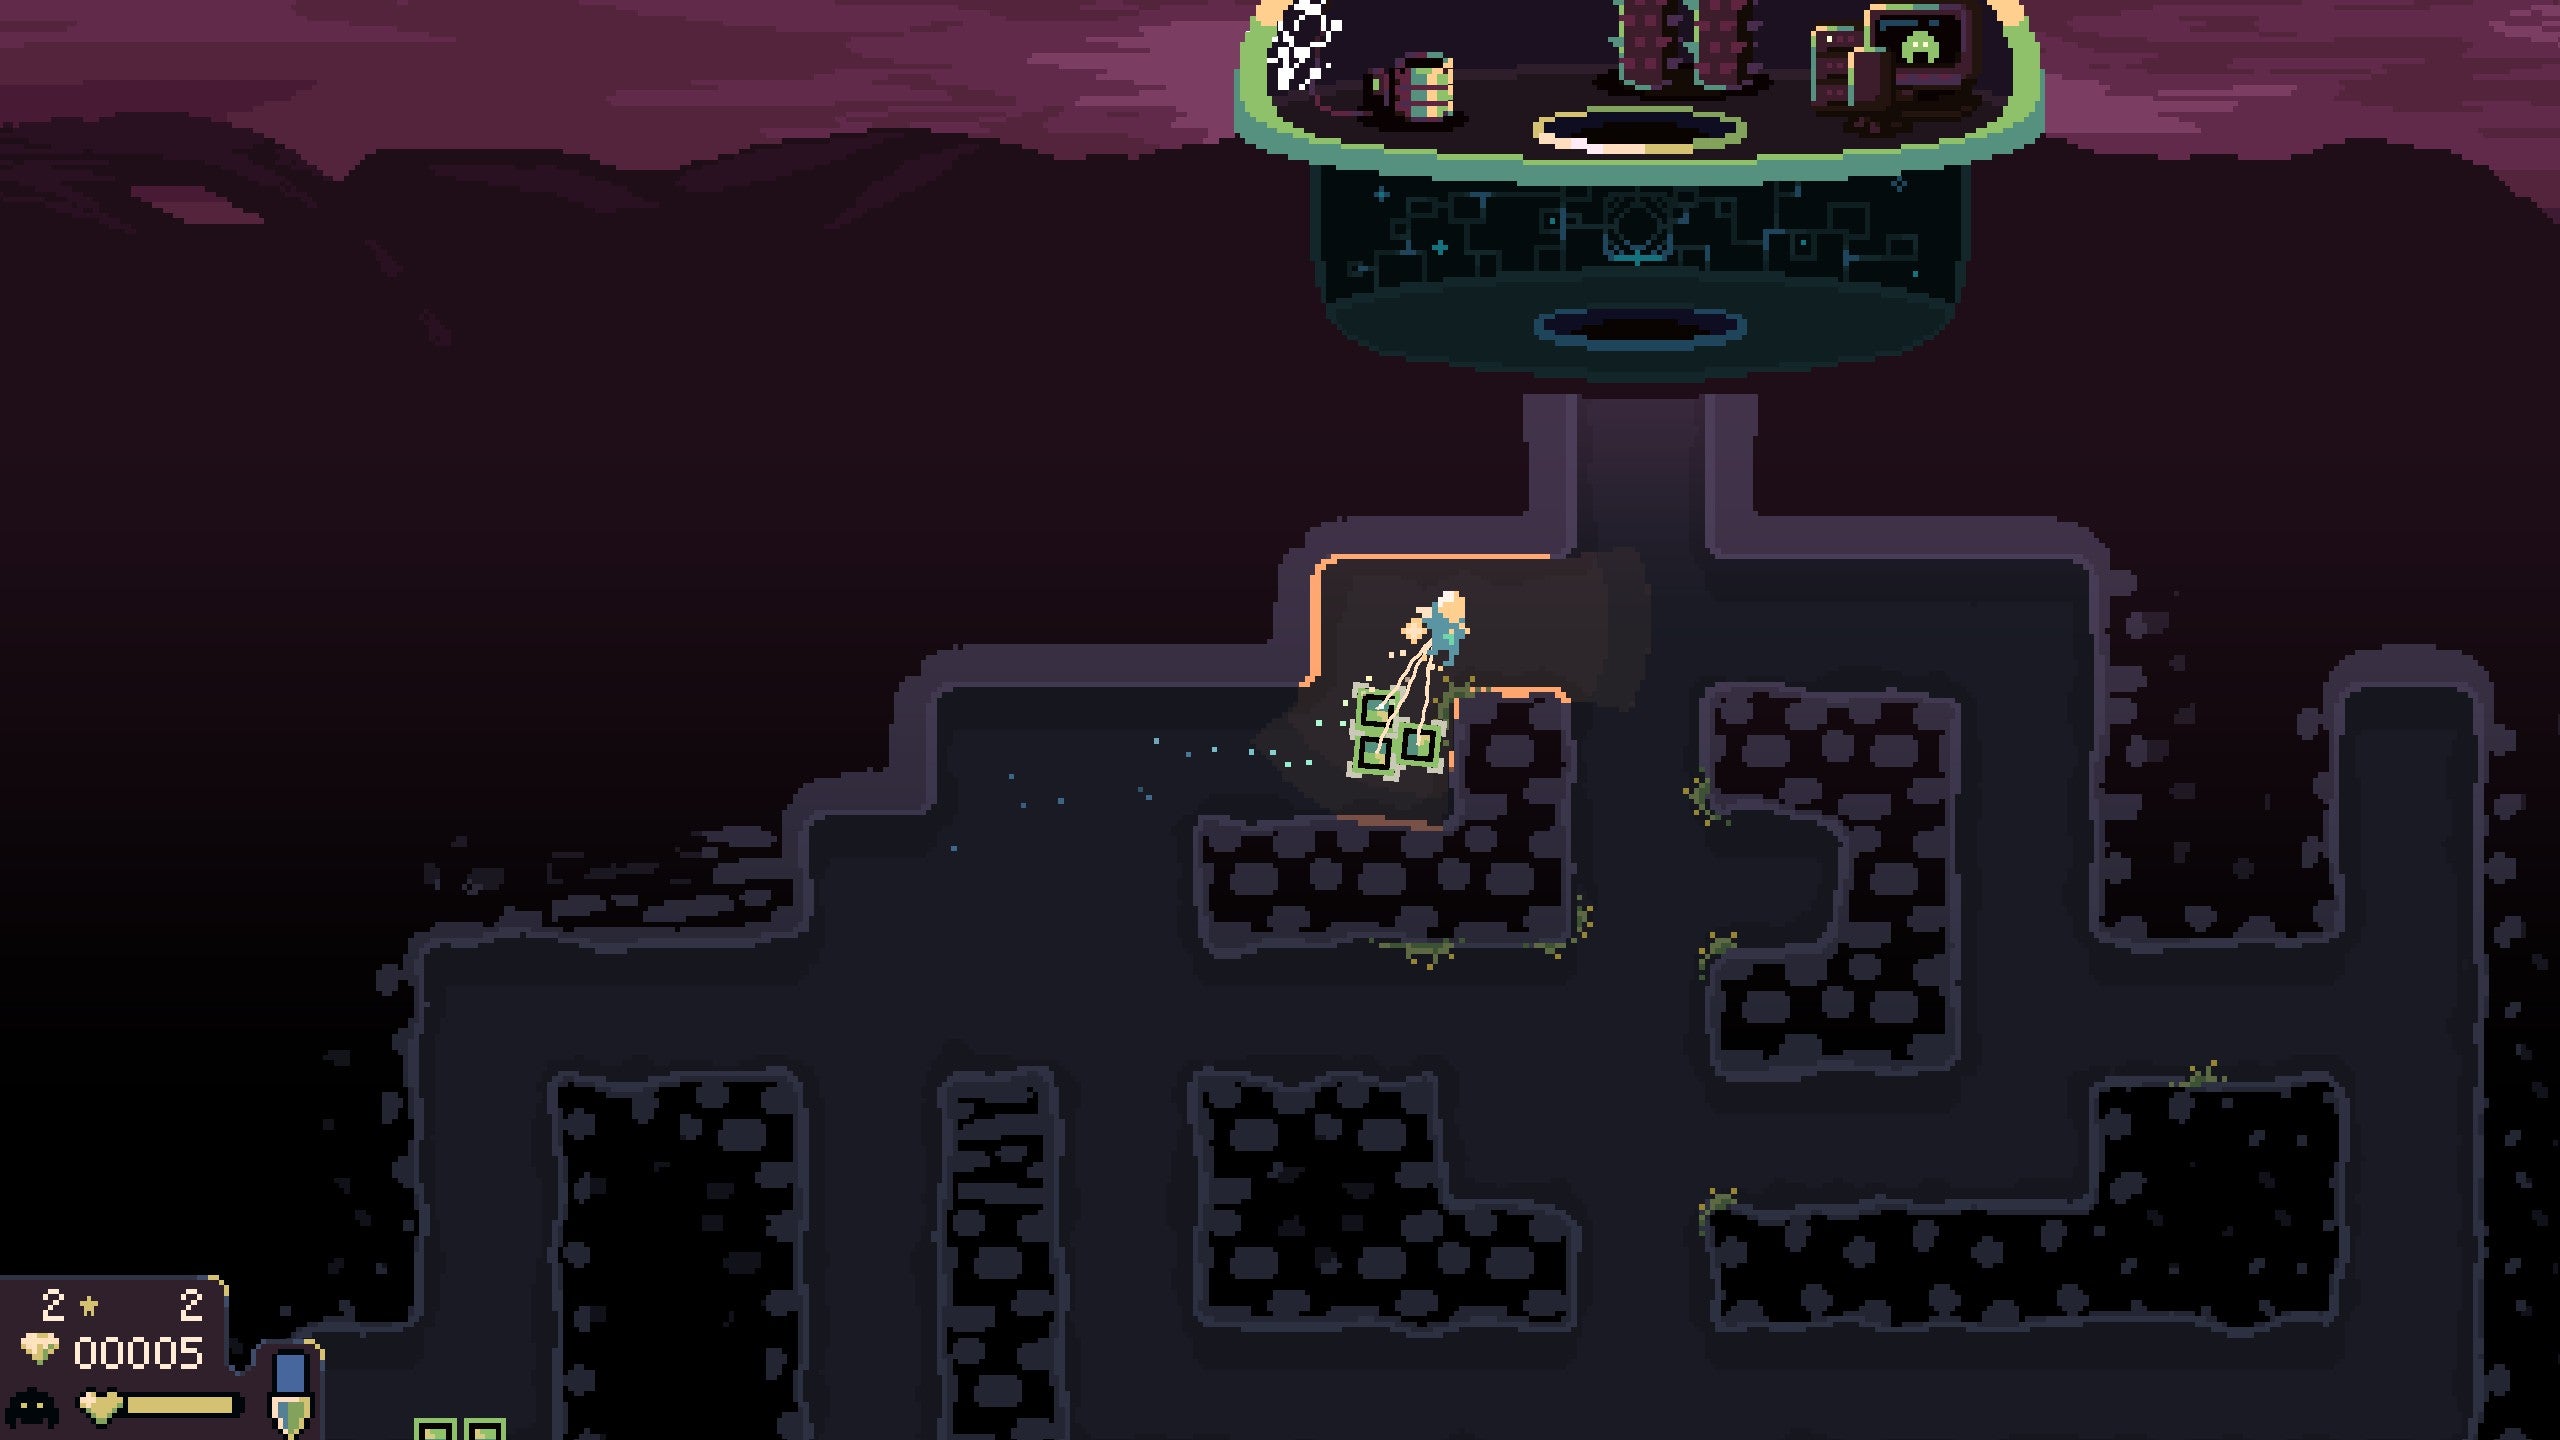 A small jetpacked person flies resources back to a domed base through a series of dug tunnels.